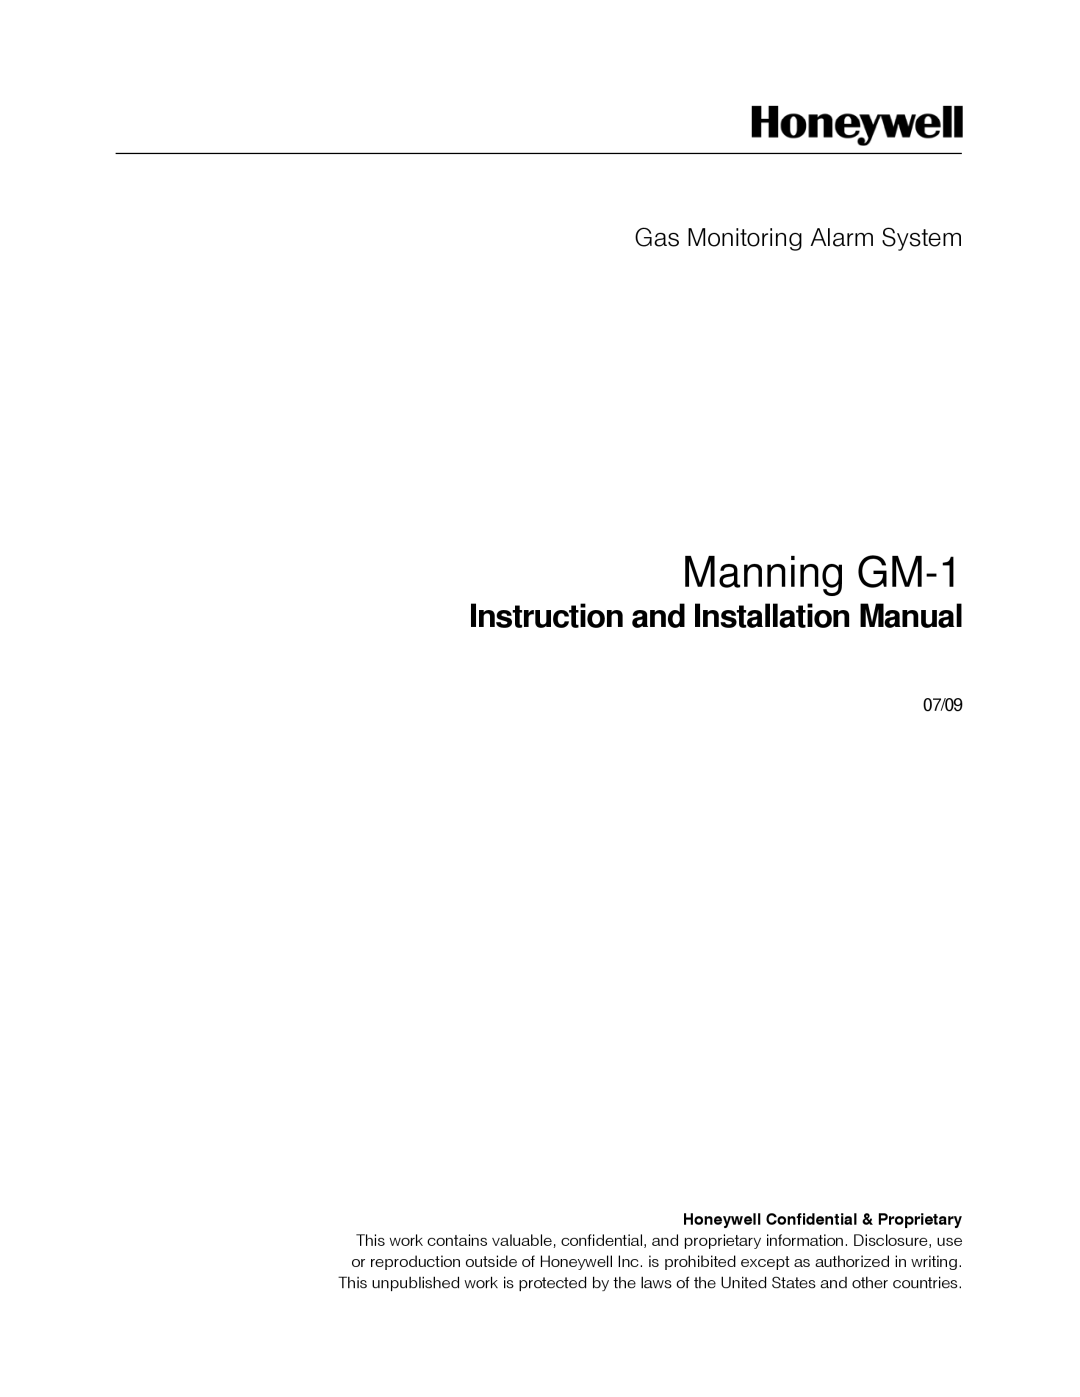 Honeywell 19546GM1 installation manual Manning GM-1, Instruction and Installation Manual, Release D Draft 